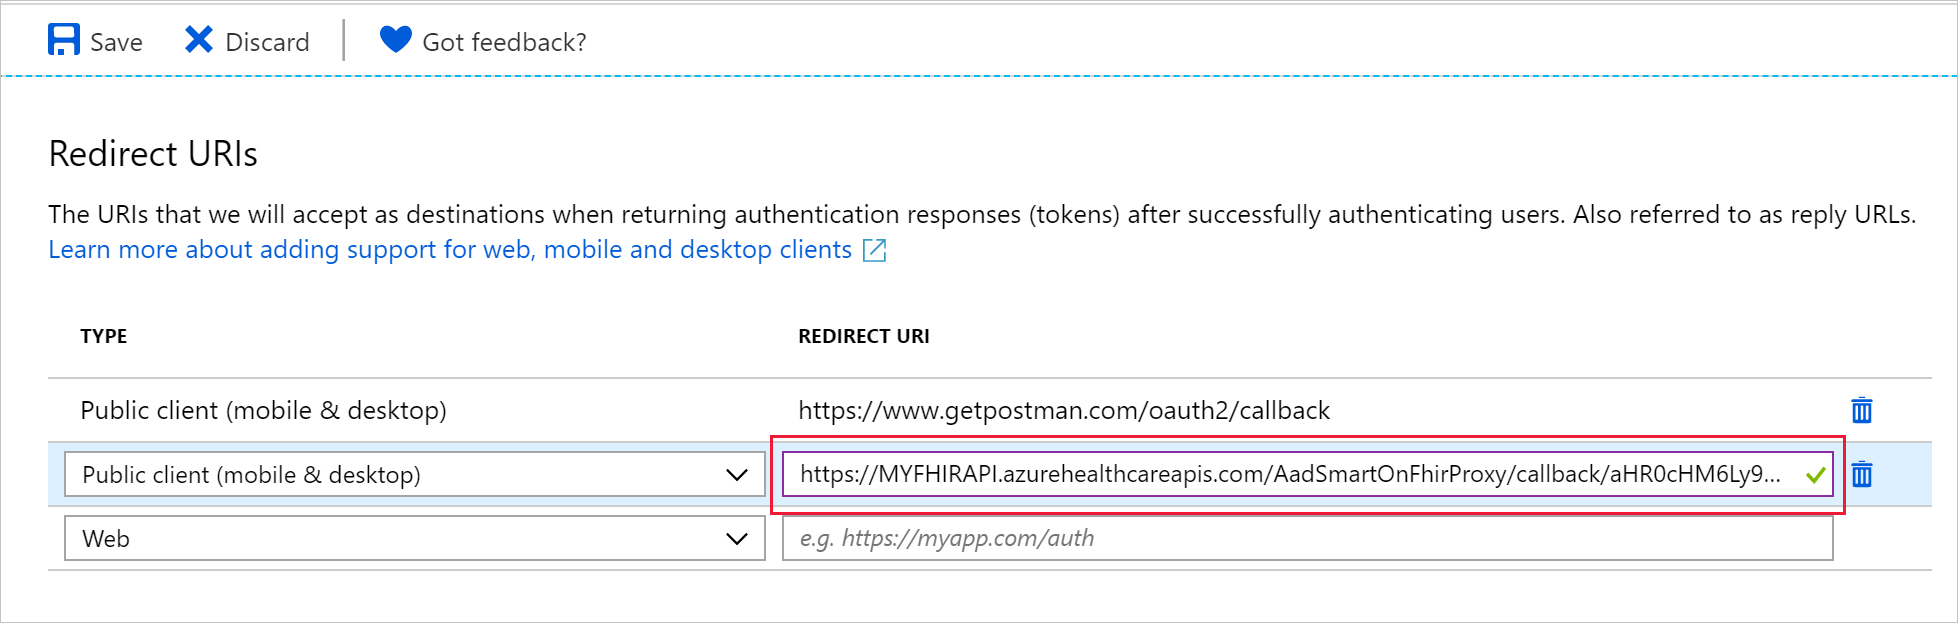 Screenshot show how reply url can be configured for the public client.